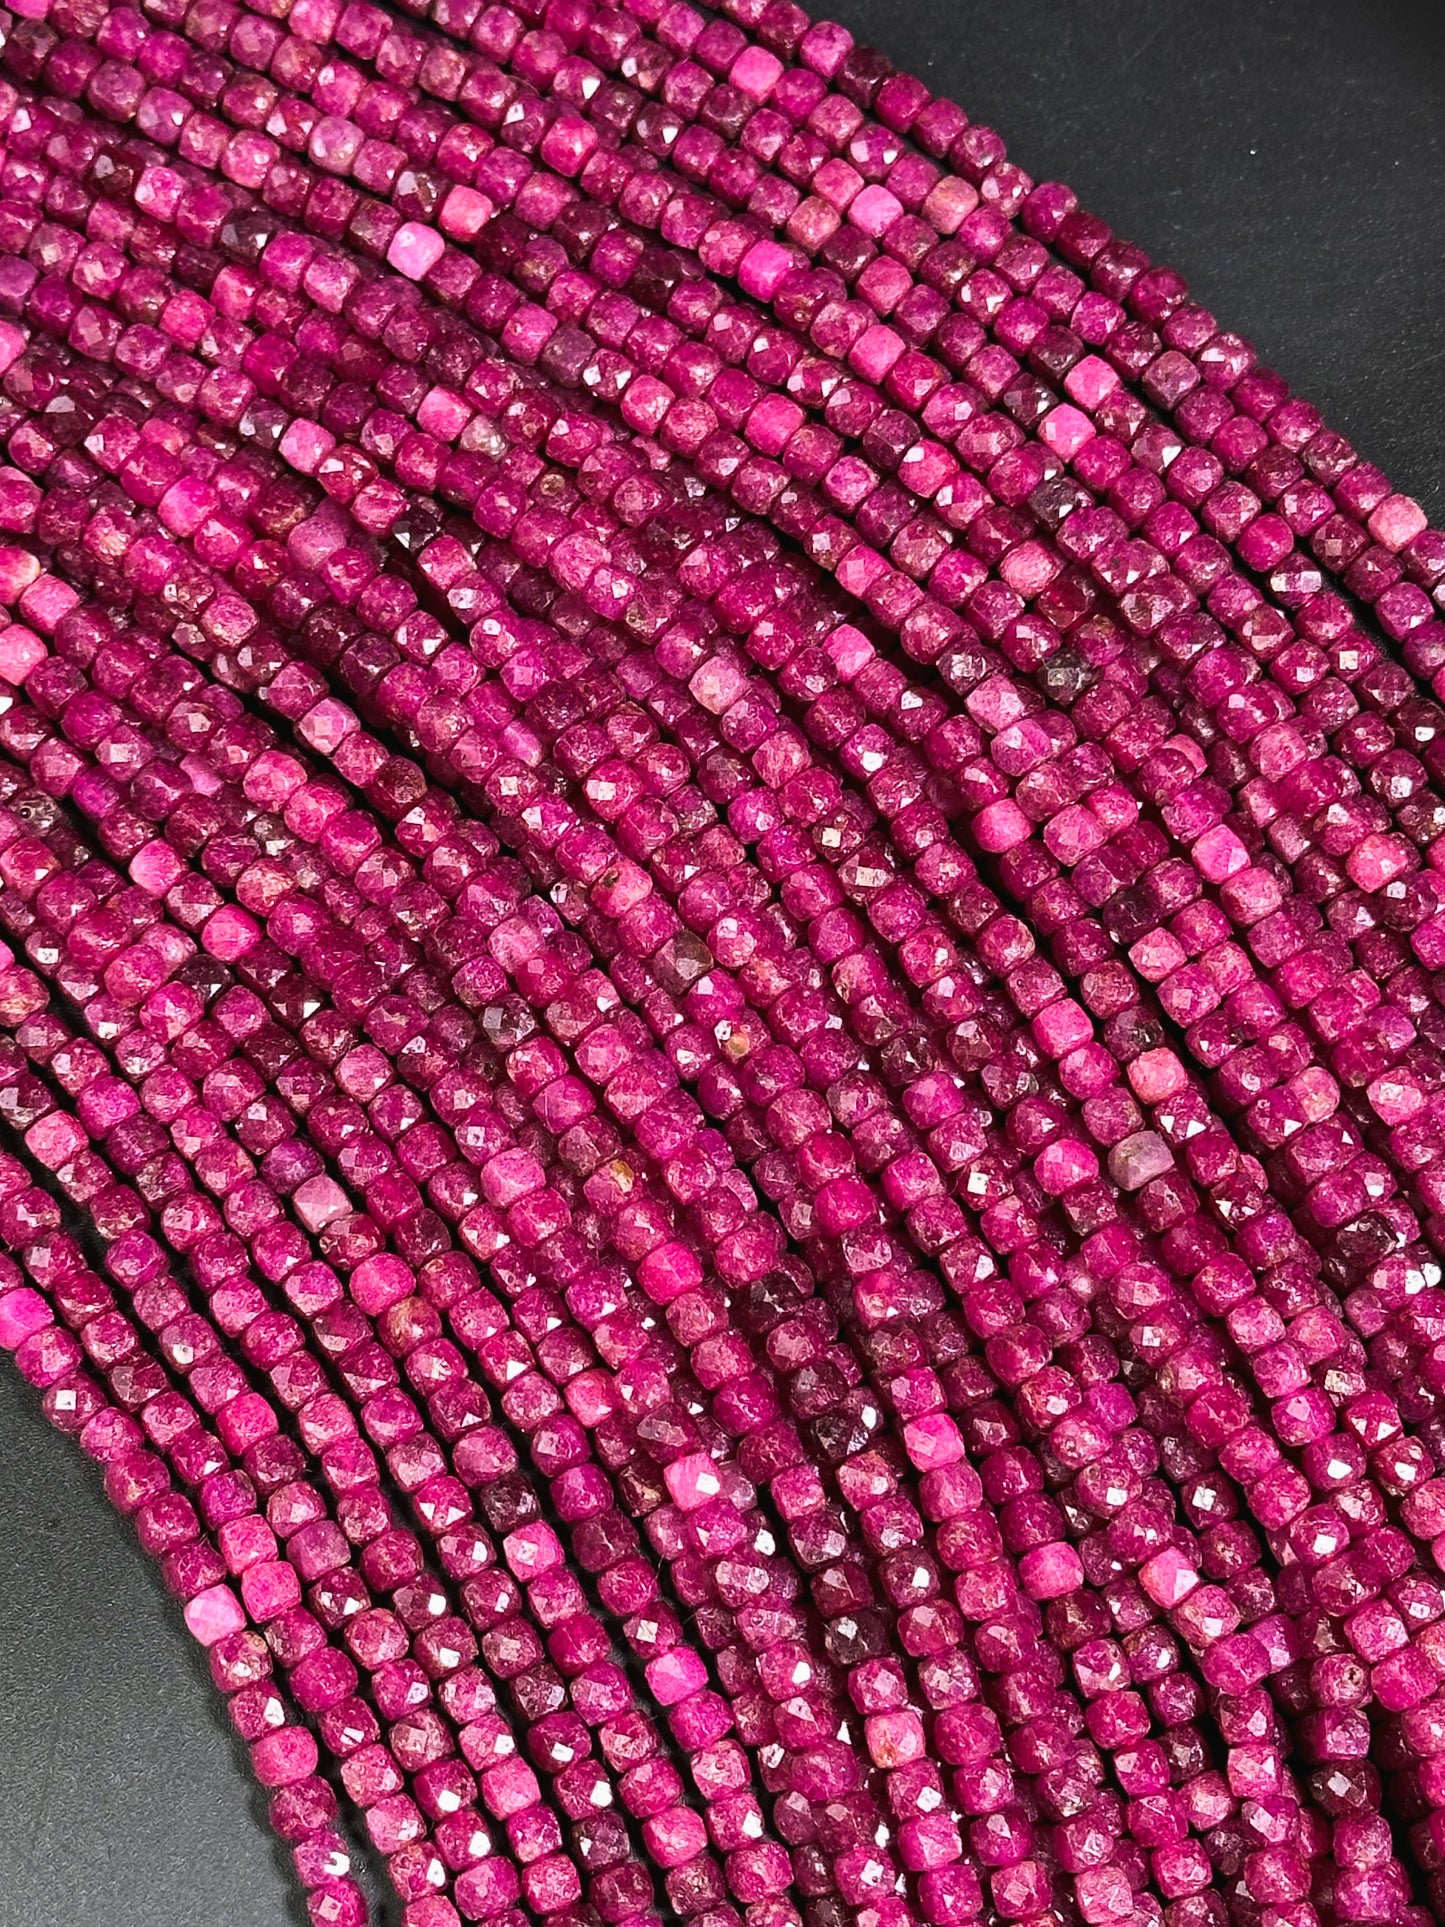 AAA Natural Ruby Quartz Gemstone Bead Faceted 4mm Cube Shape, Gorgeous Red Pink Color Ruby Quartz Gemstone Bead Excellent Quality 15.5"